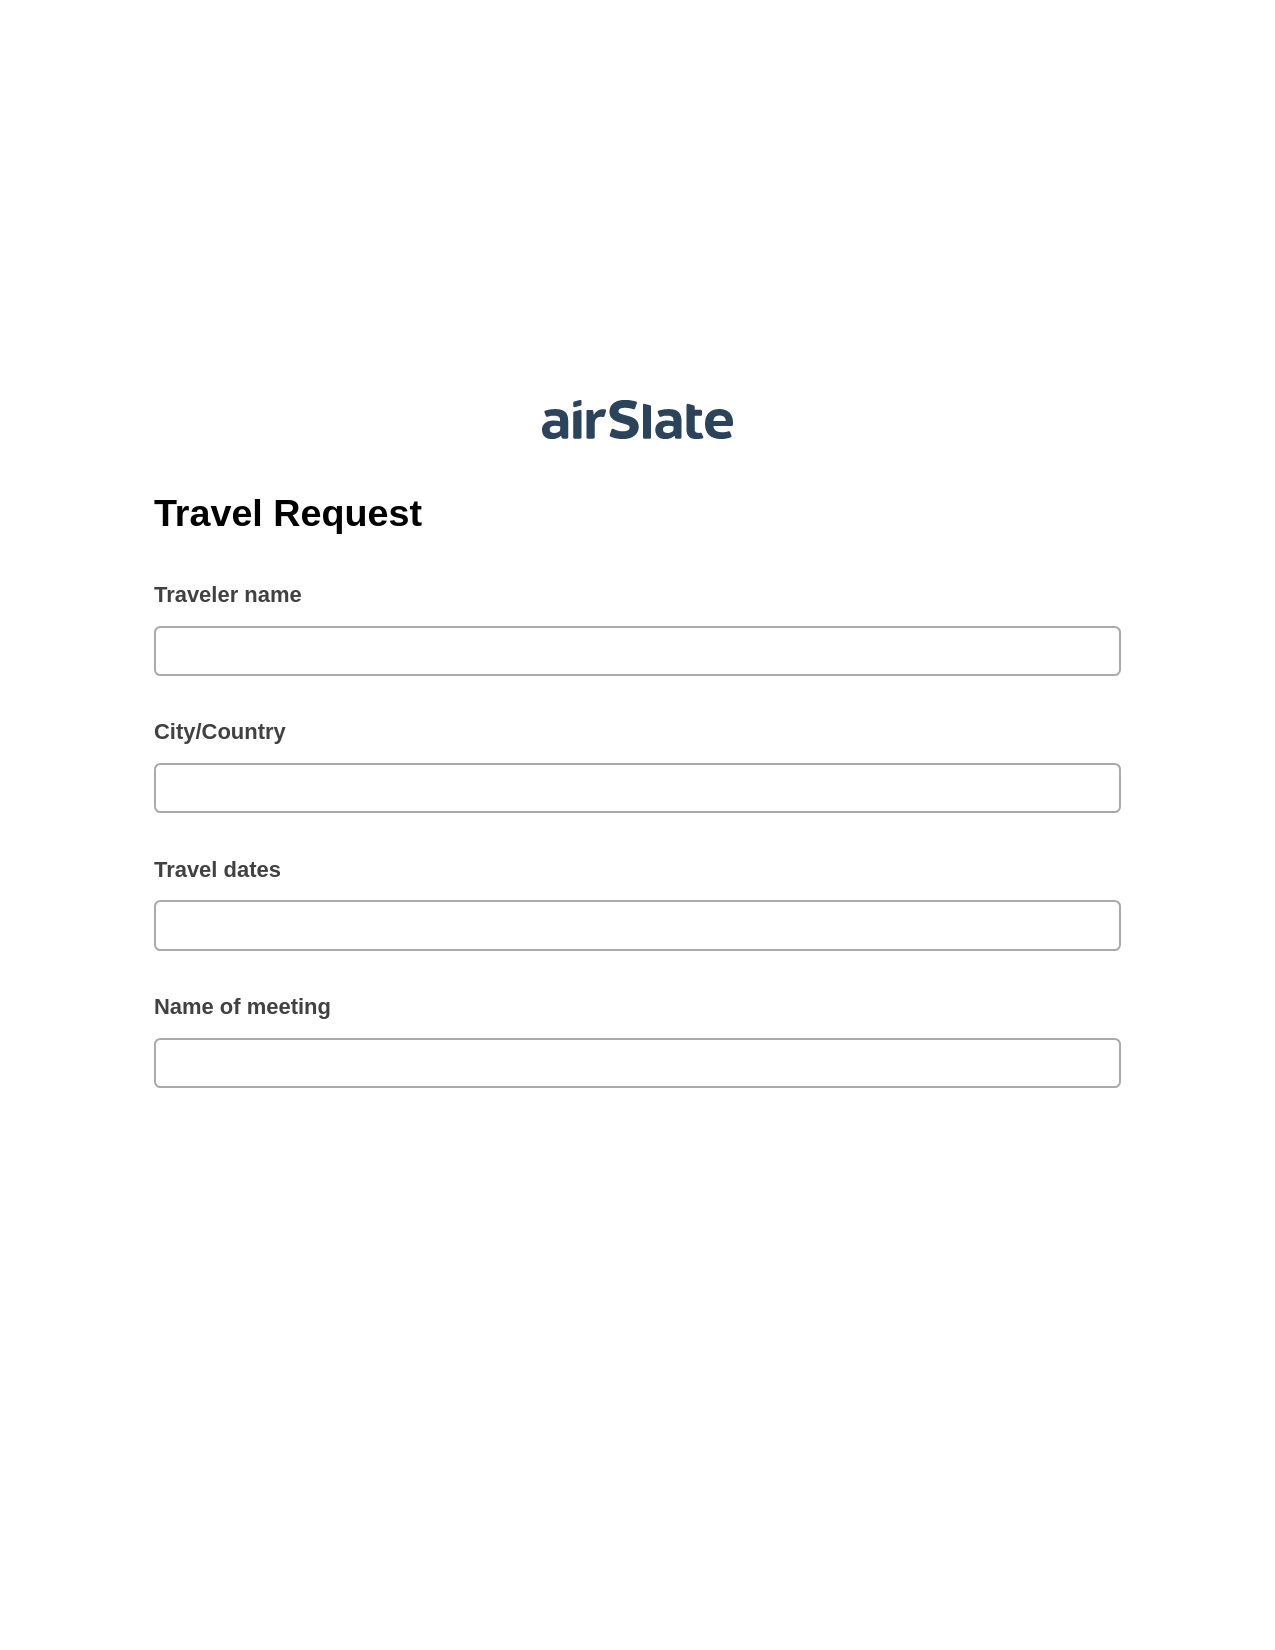 Travel Request Pre-fill from CSV File Bot, Pre-fill with Custom Data Bot, Webhook Postfinish Bot